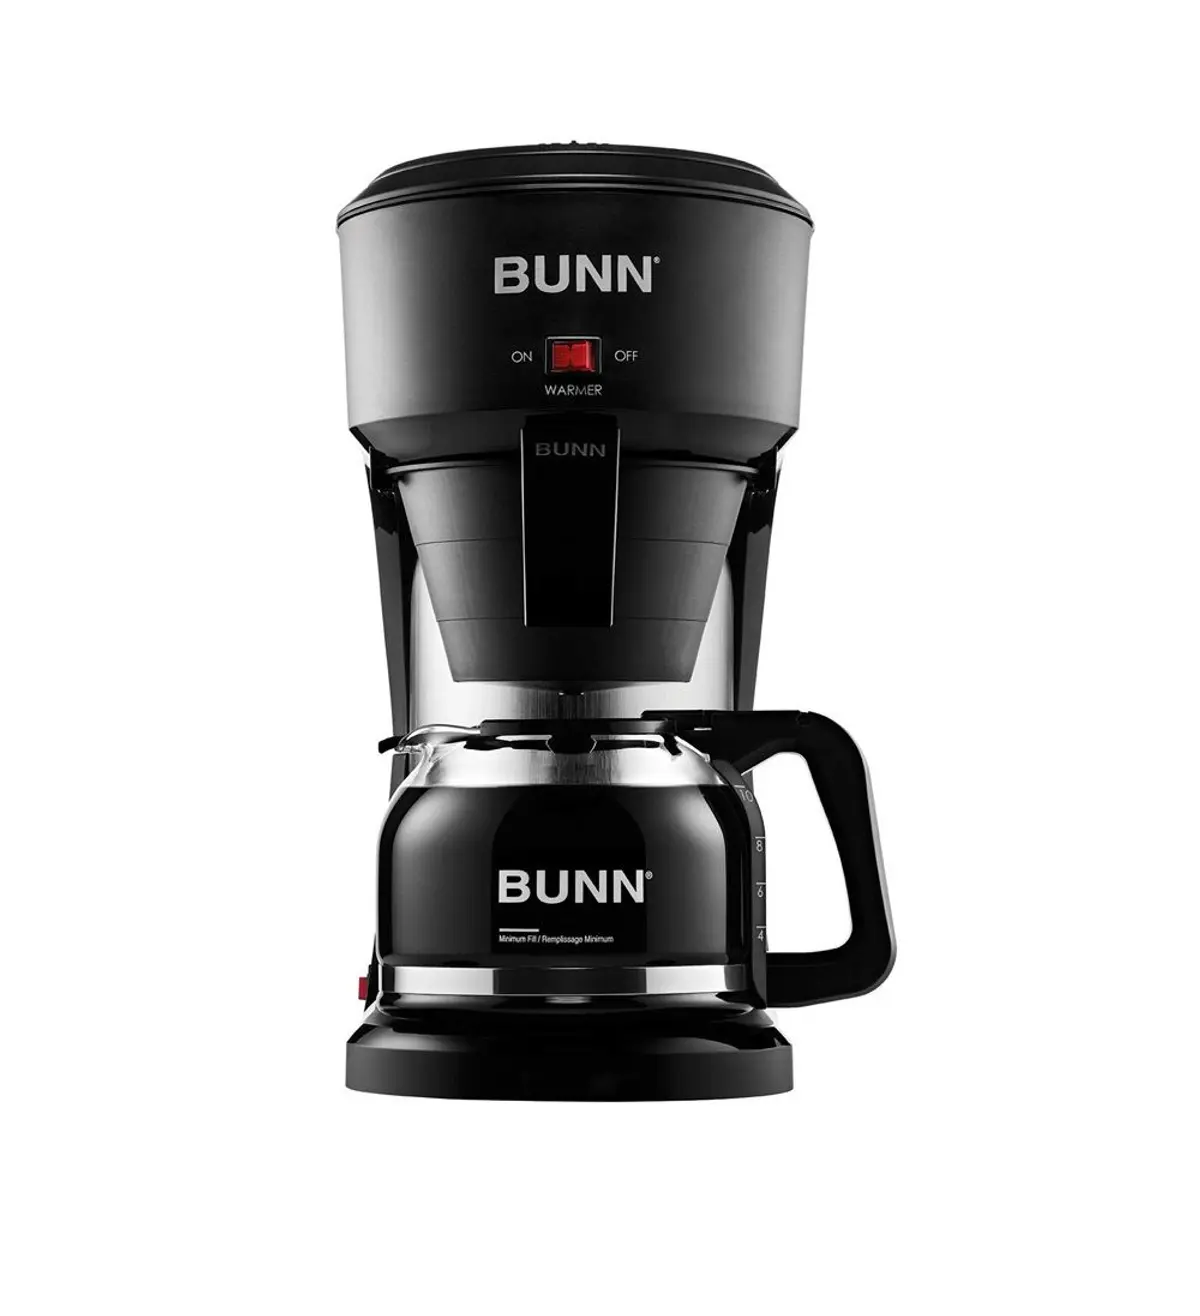 Bunn Speed Brew 10-Cup Coffee Maker review